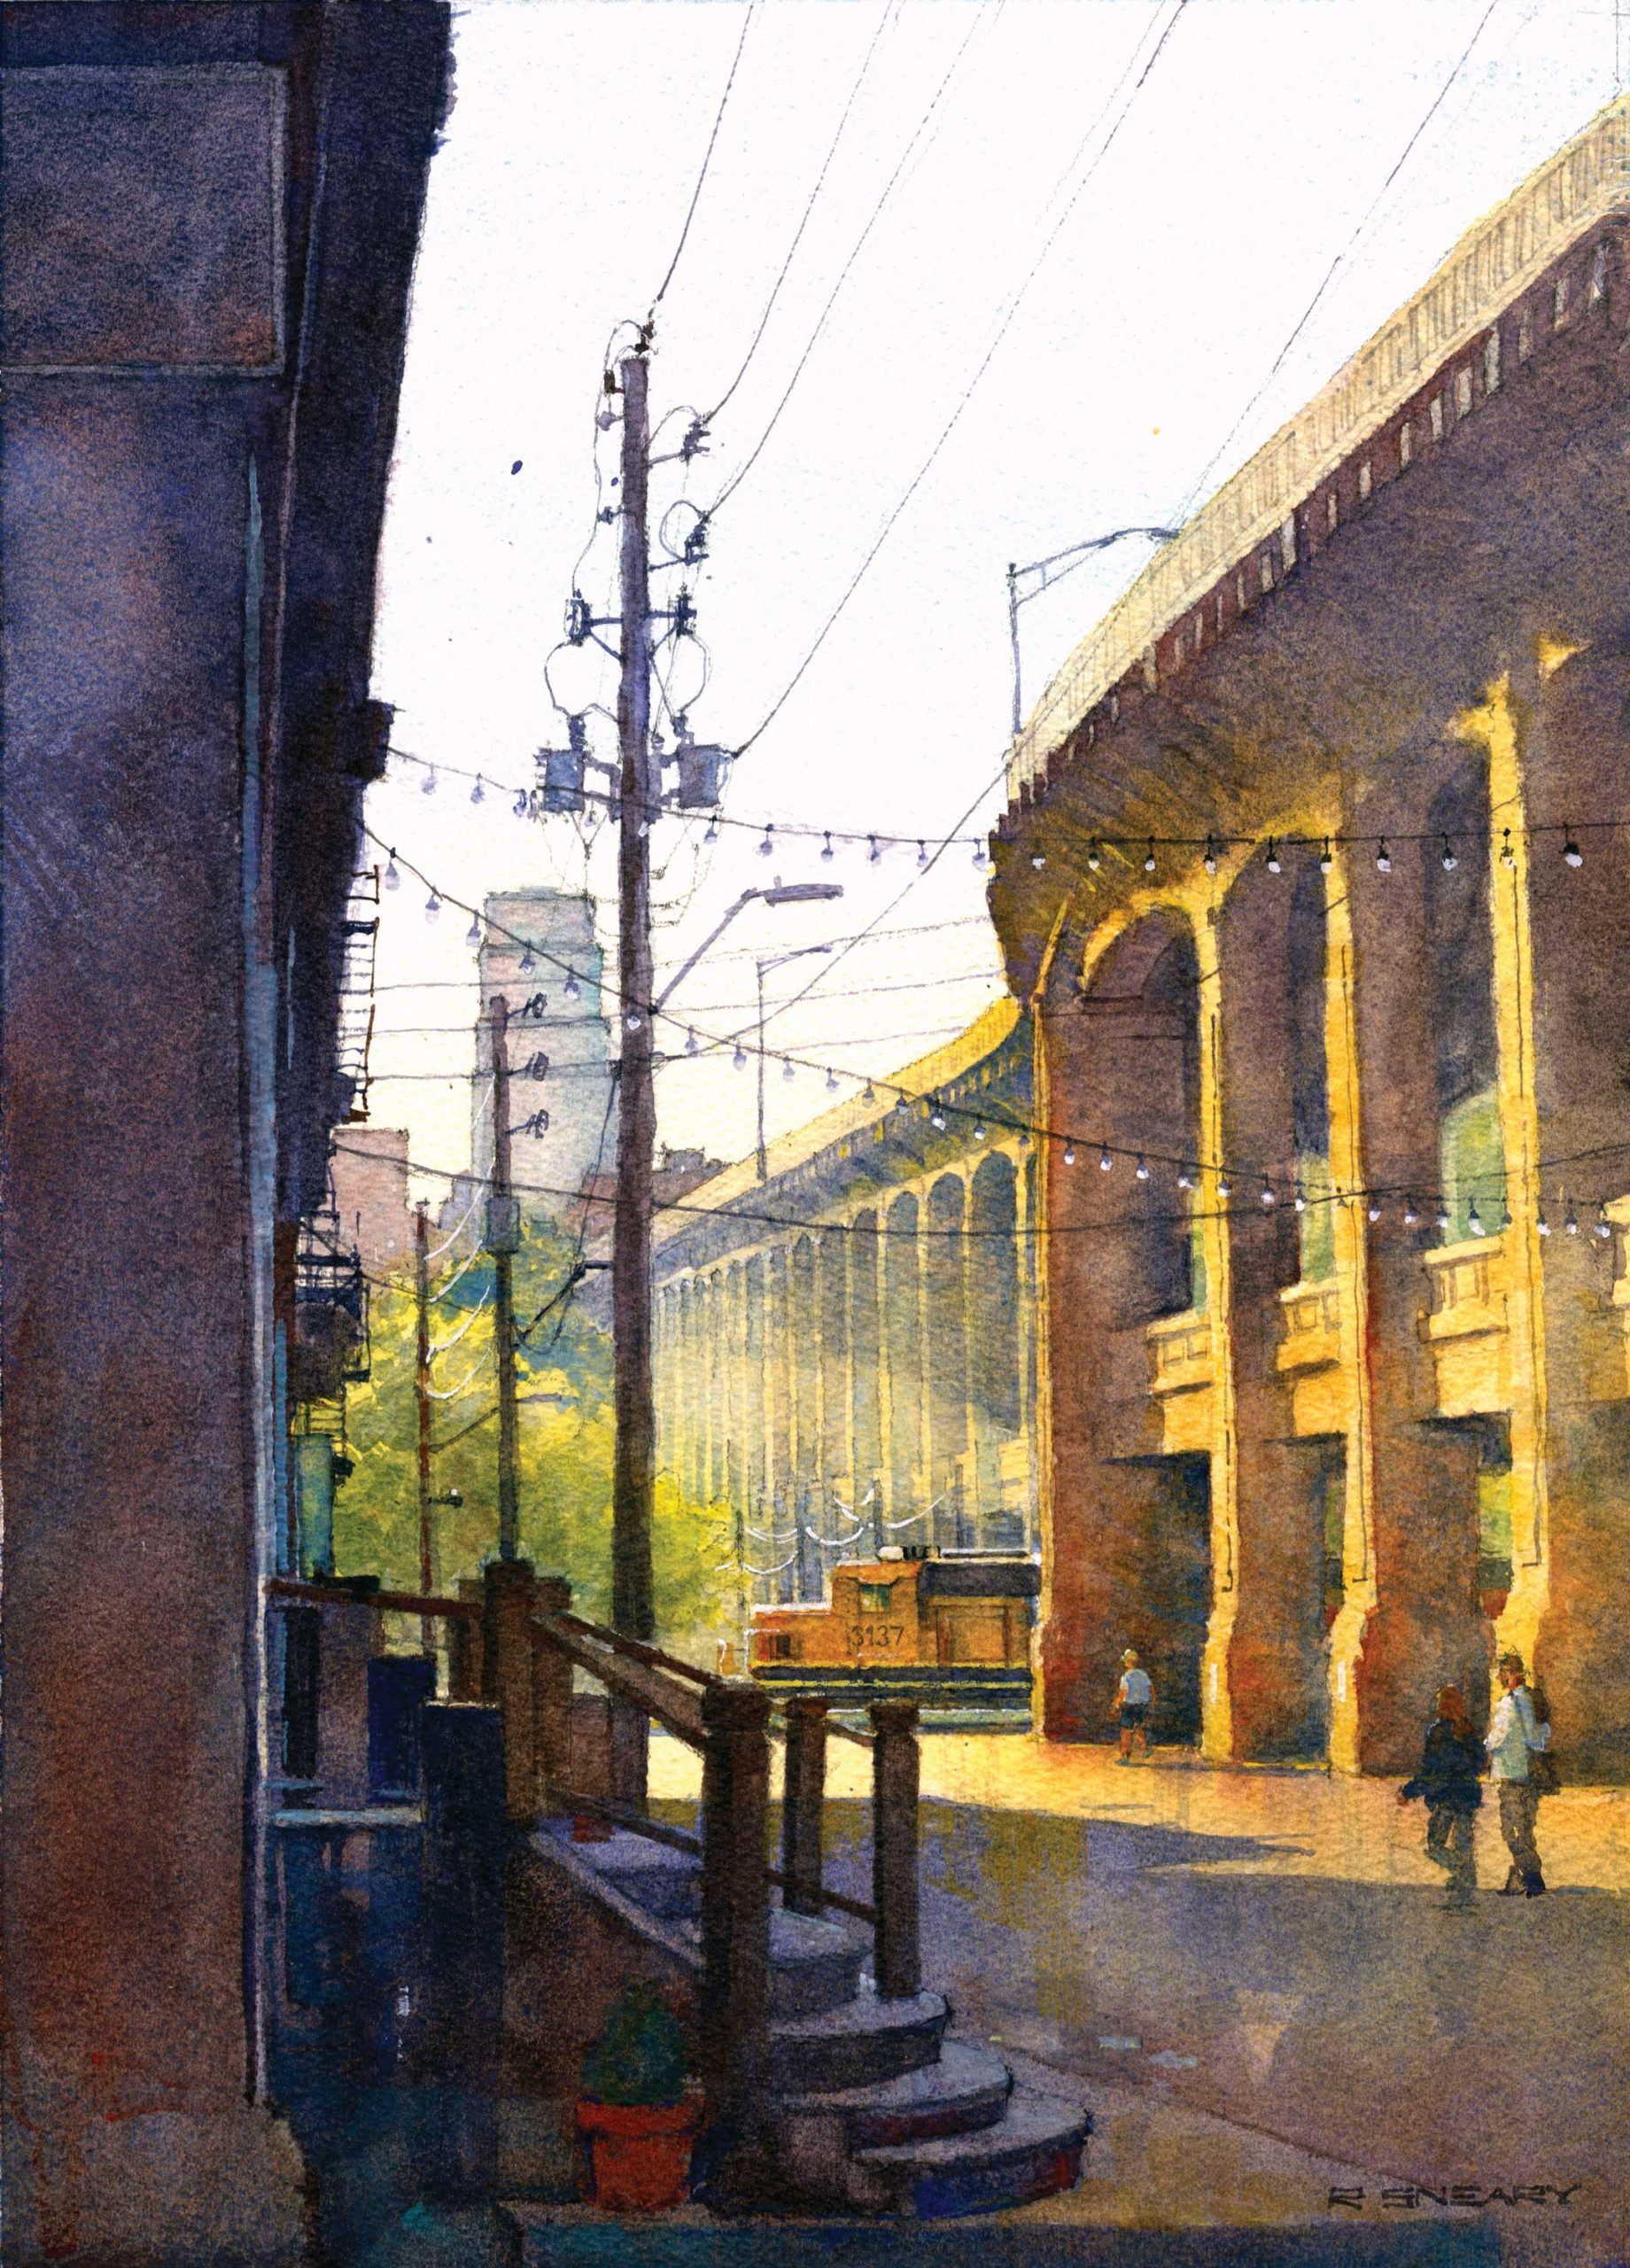 Richard Sneary, "12th Street Viaduct," 2020, watercolor, 14 x 10 in., private collection, plein air